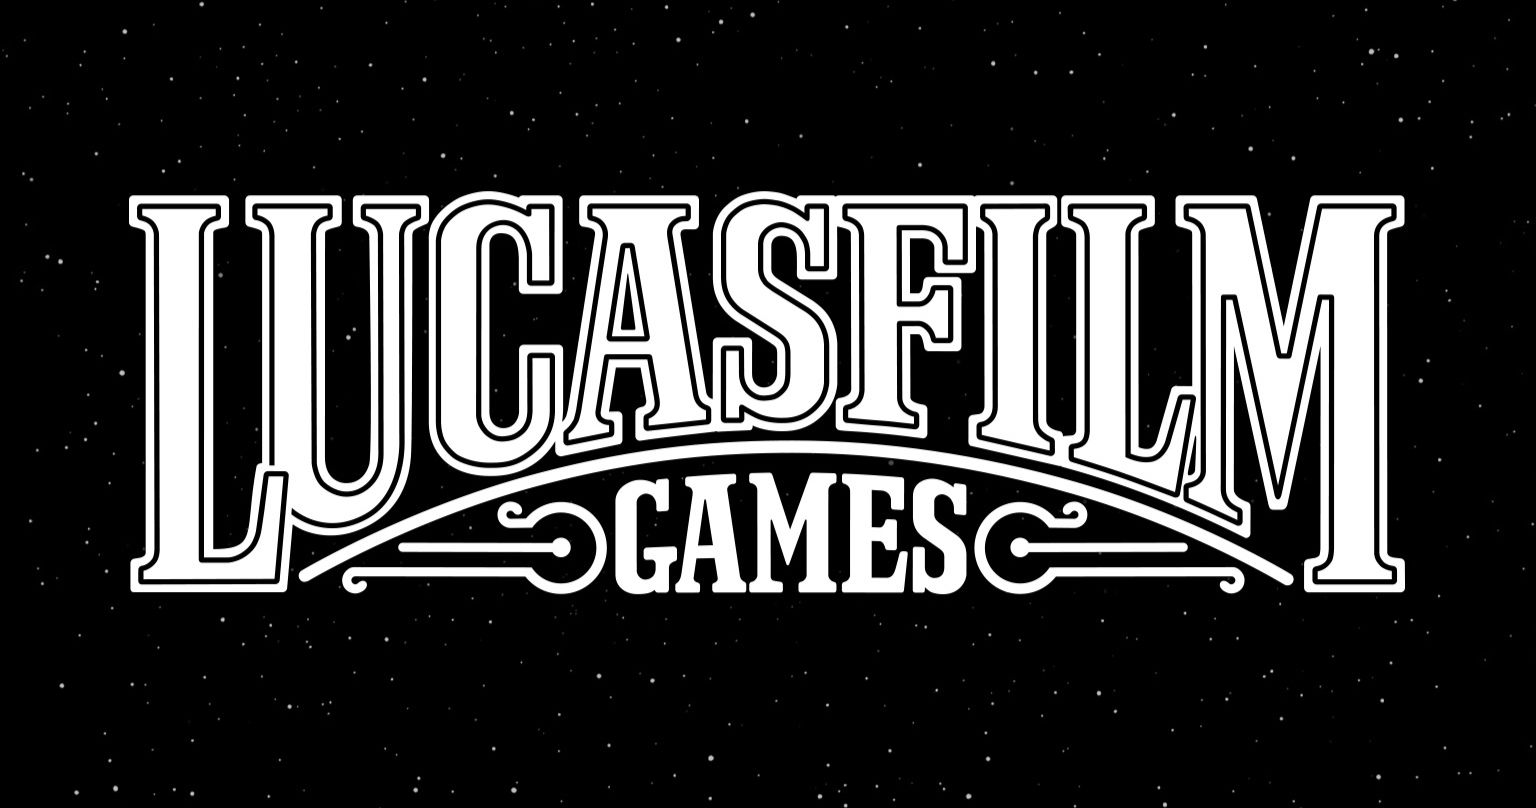 Lucasfilm Games Trailer Officially Launches the New Home of Star Wars Video Games